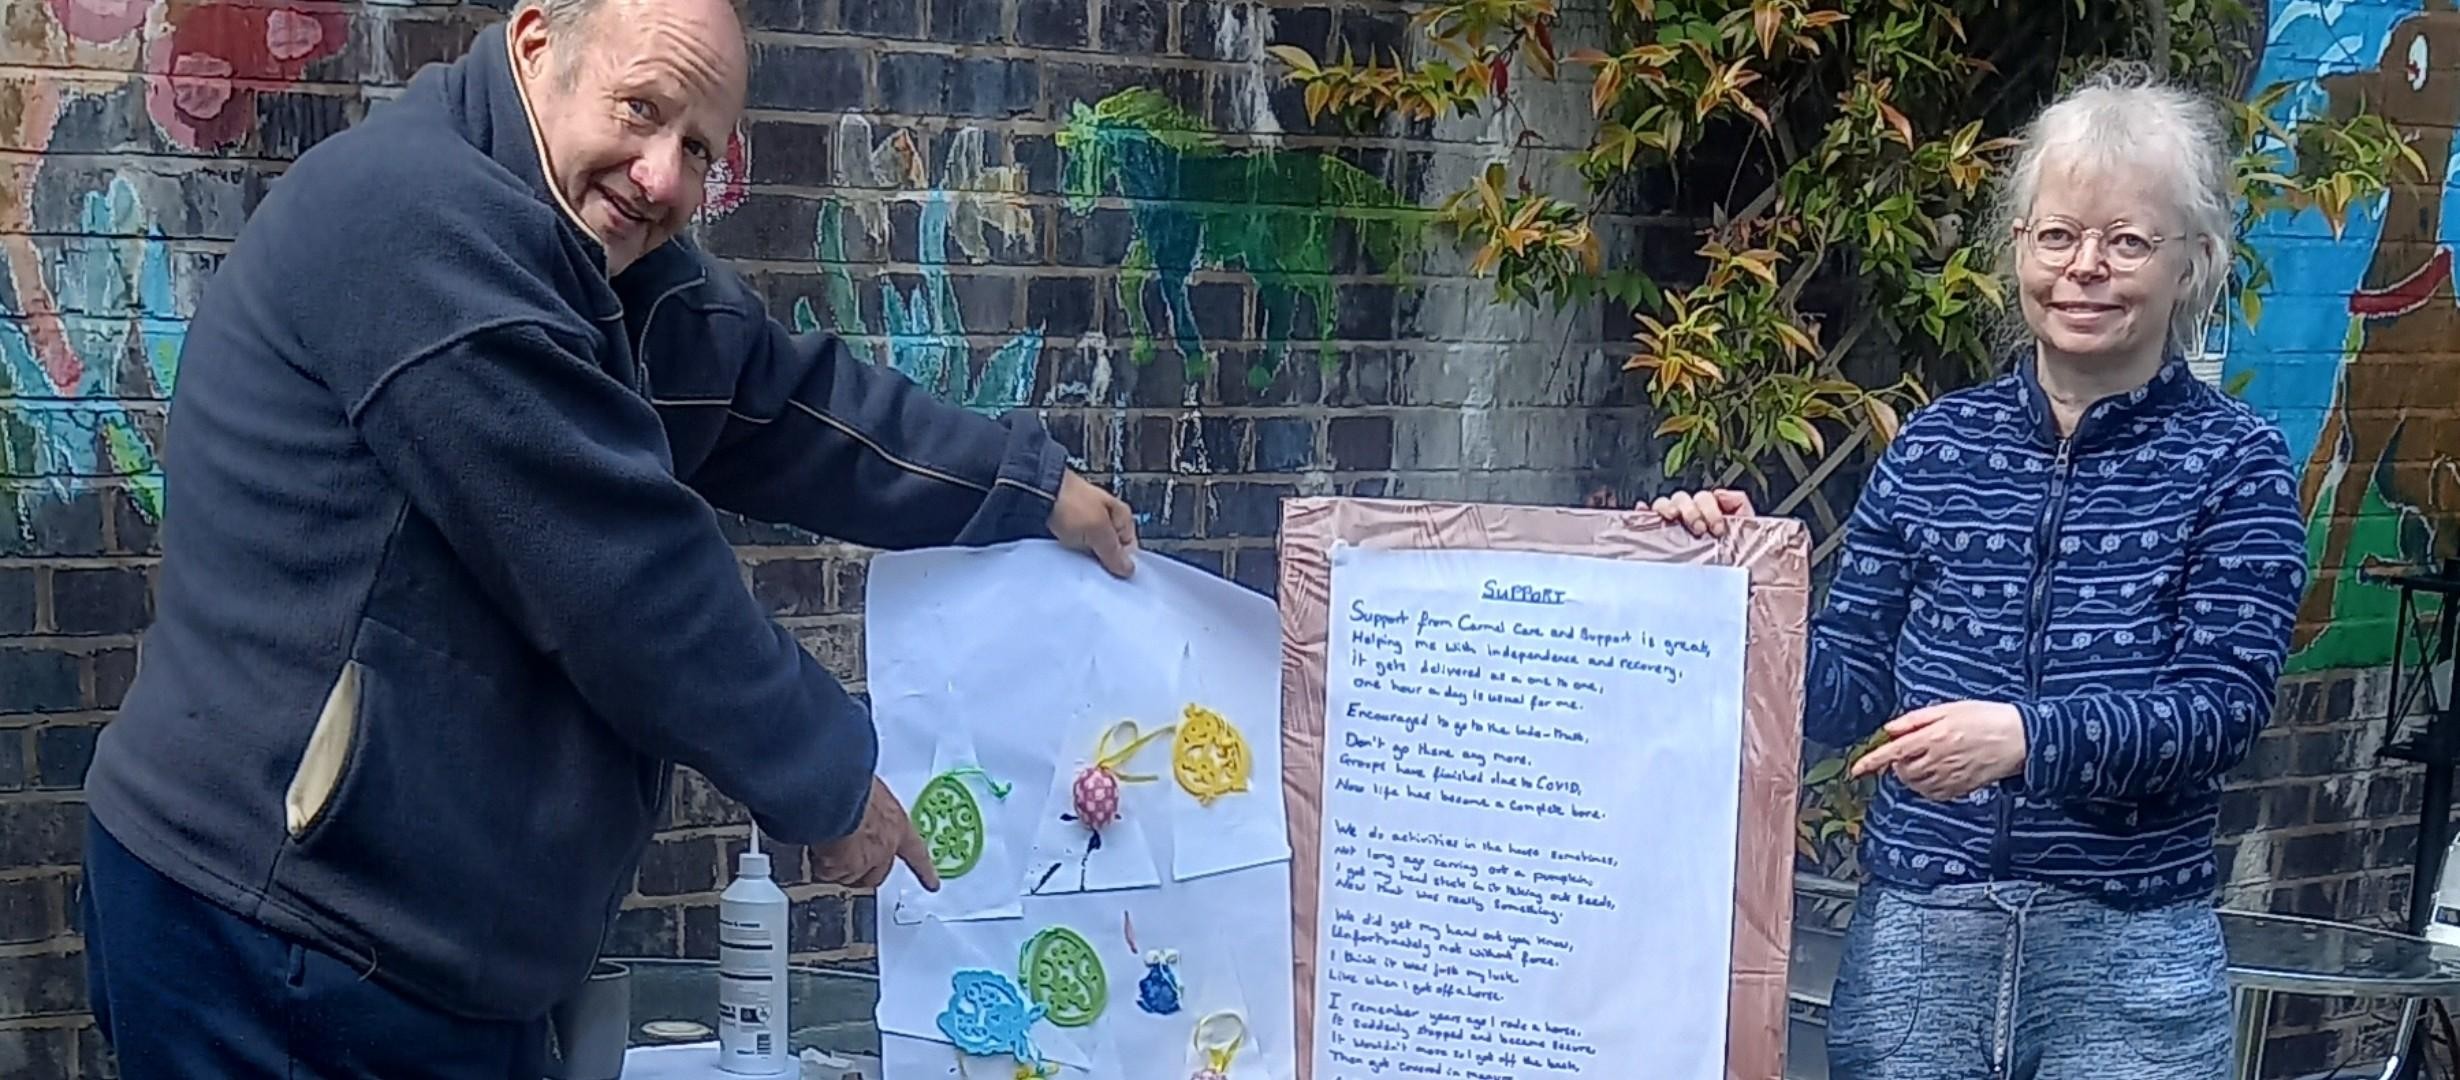 man pointing to artwork, woman pointing to poem. outside